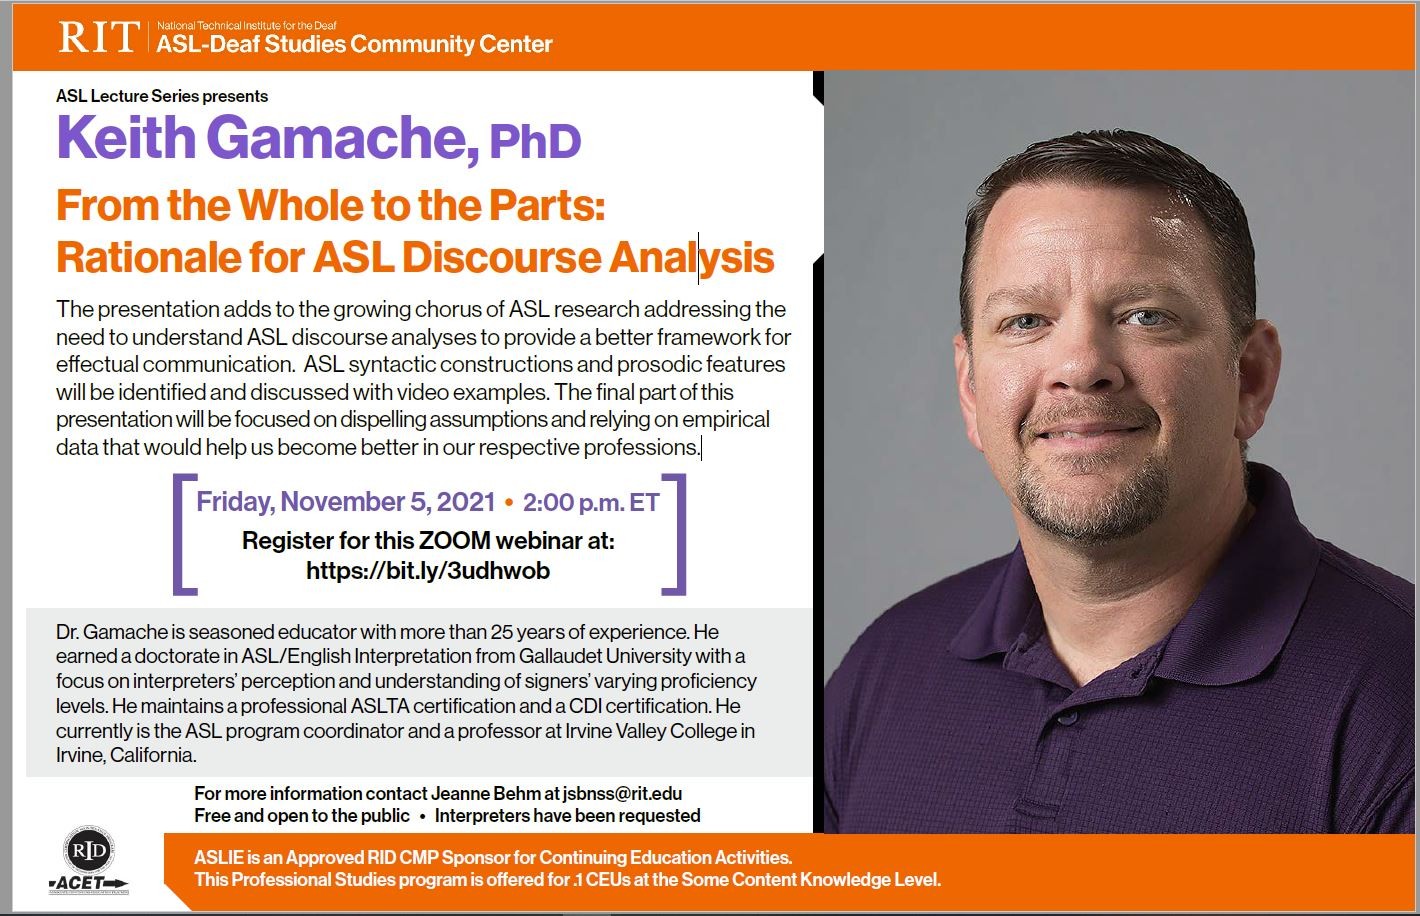 ASL Lecture Series Presents Keith Gamache, PhD